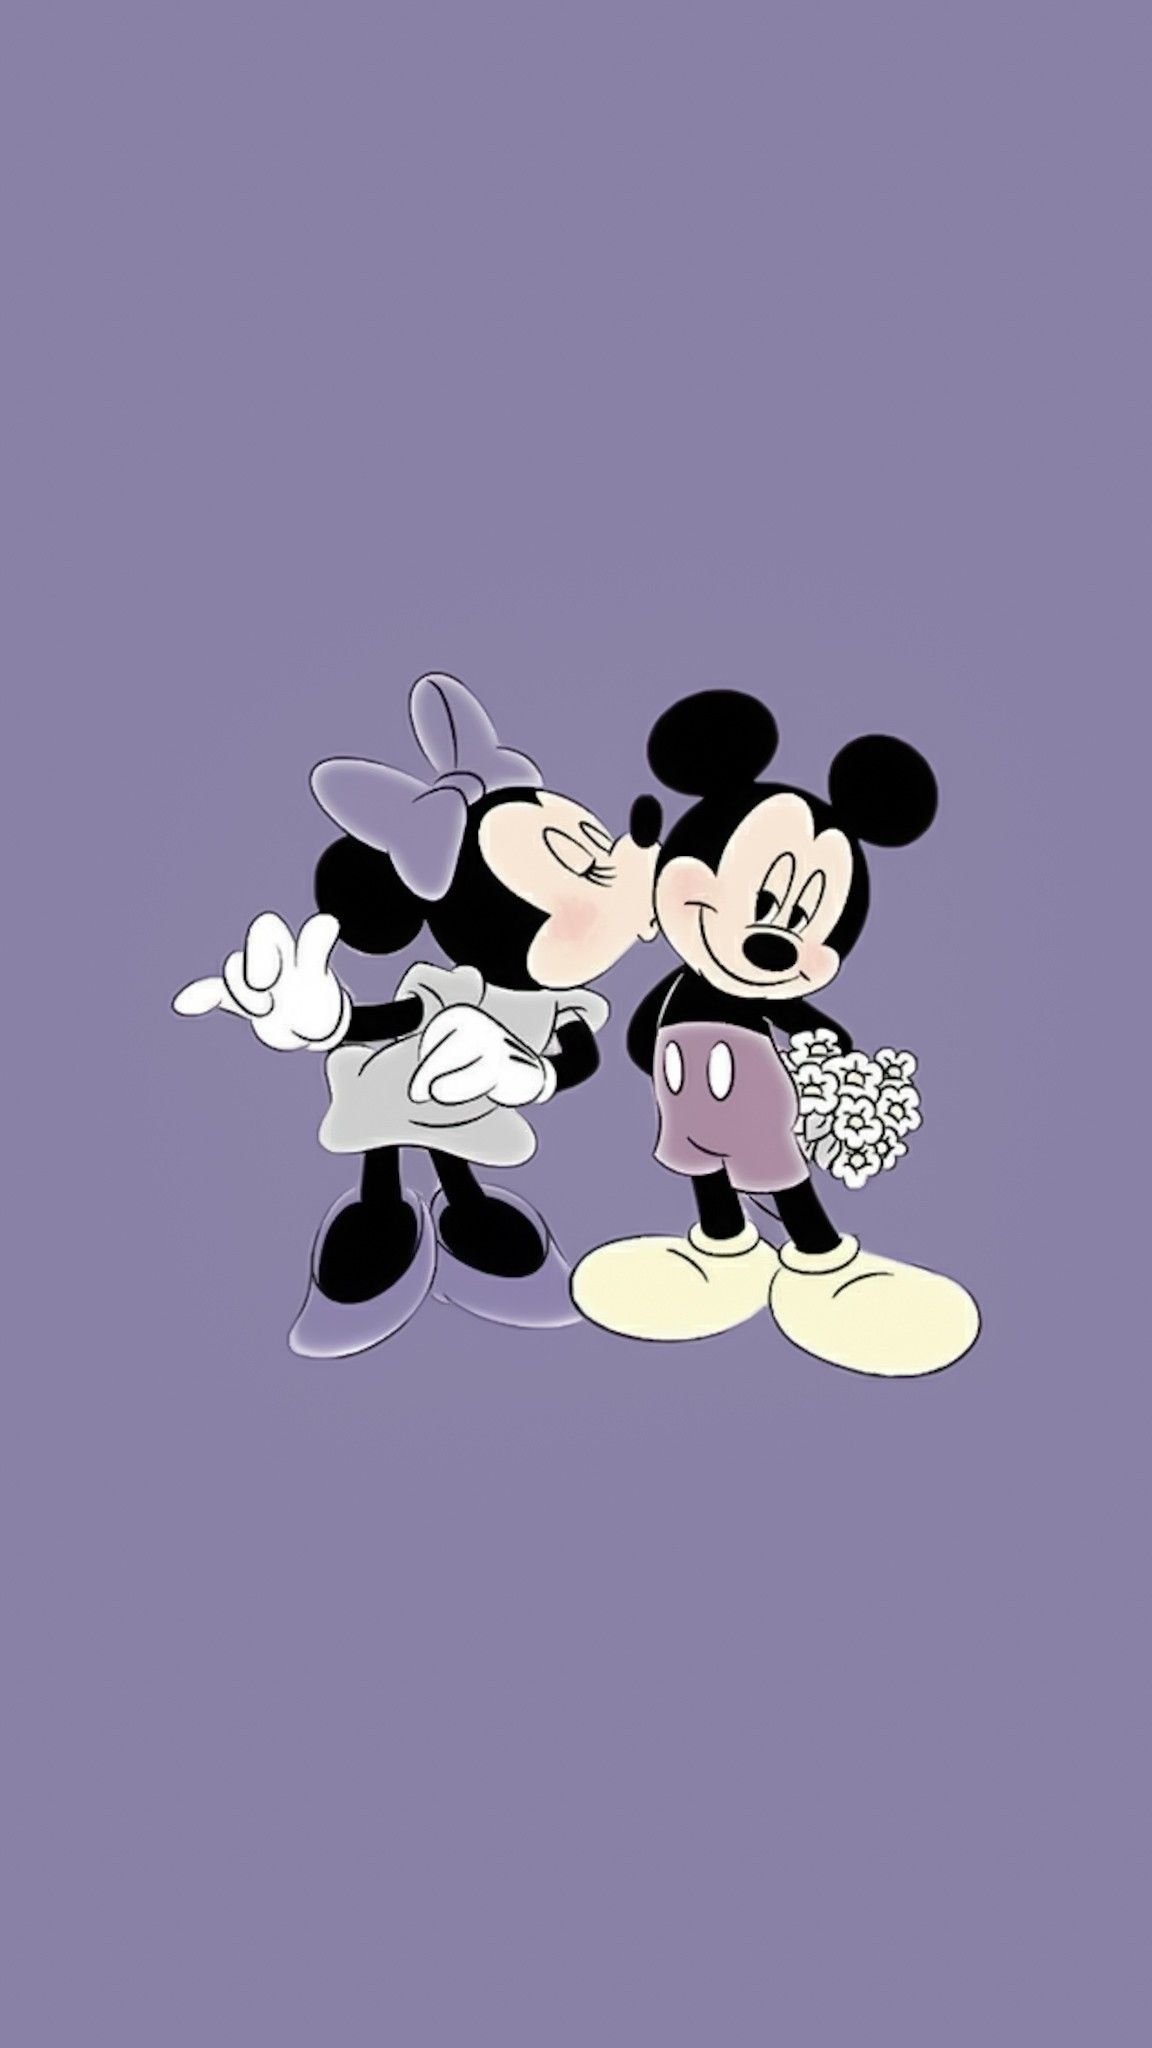 Related Wallpapers  Mickey Mouse Transparent PNG  458x473  Free Download  on NicePNG